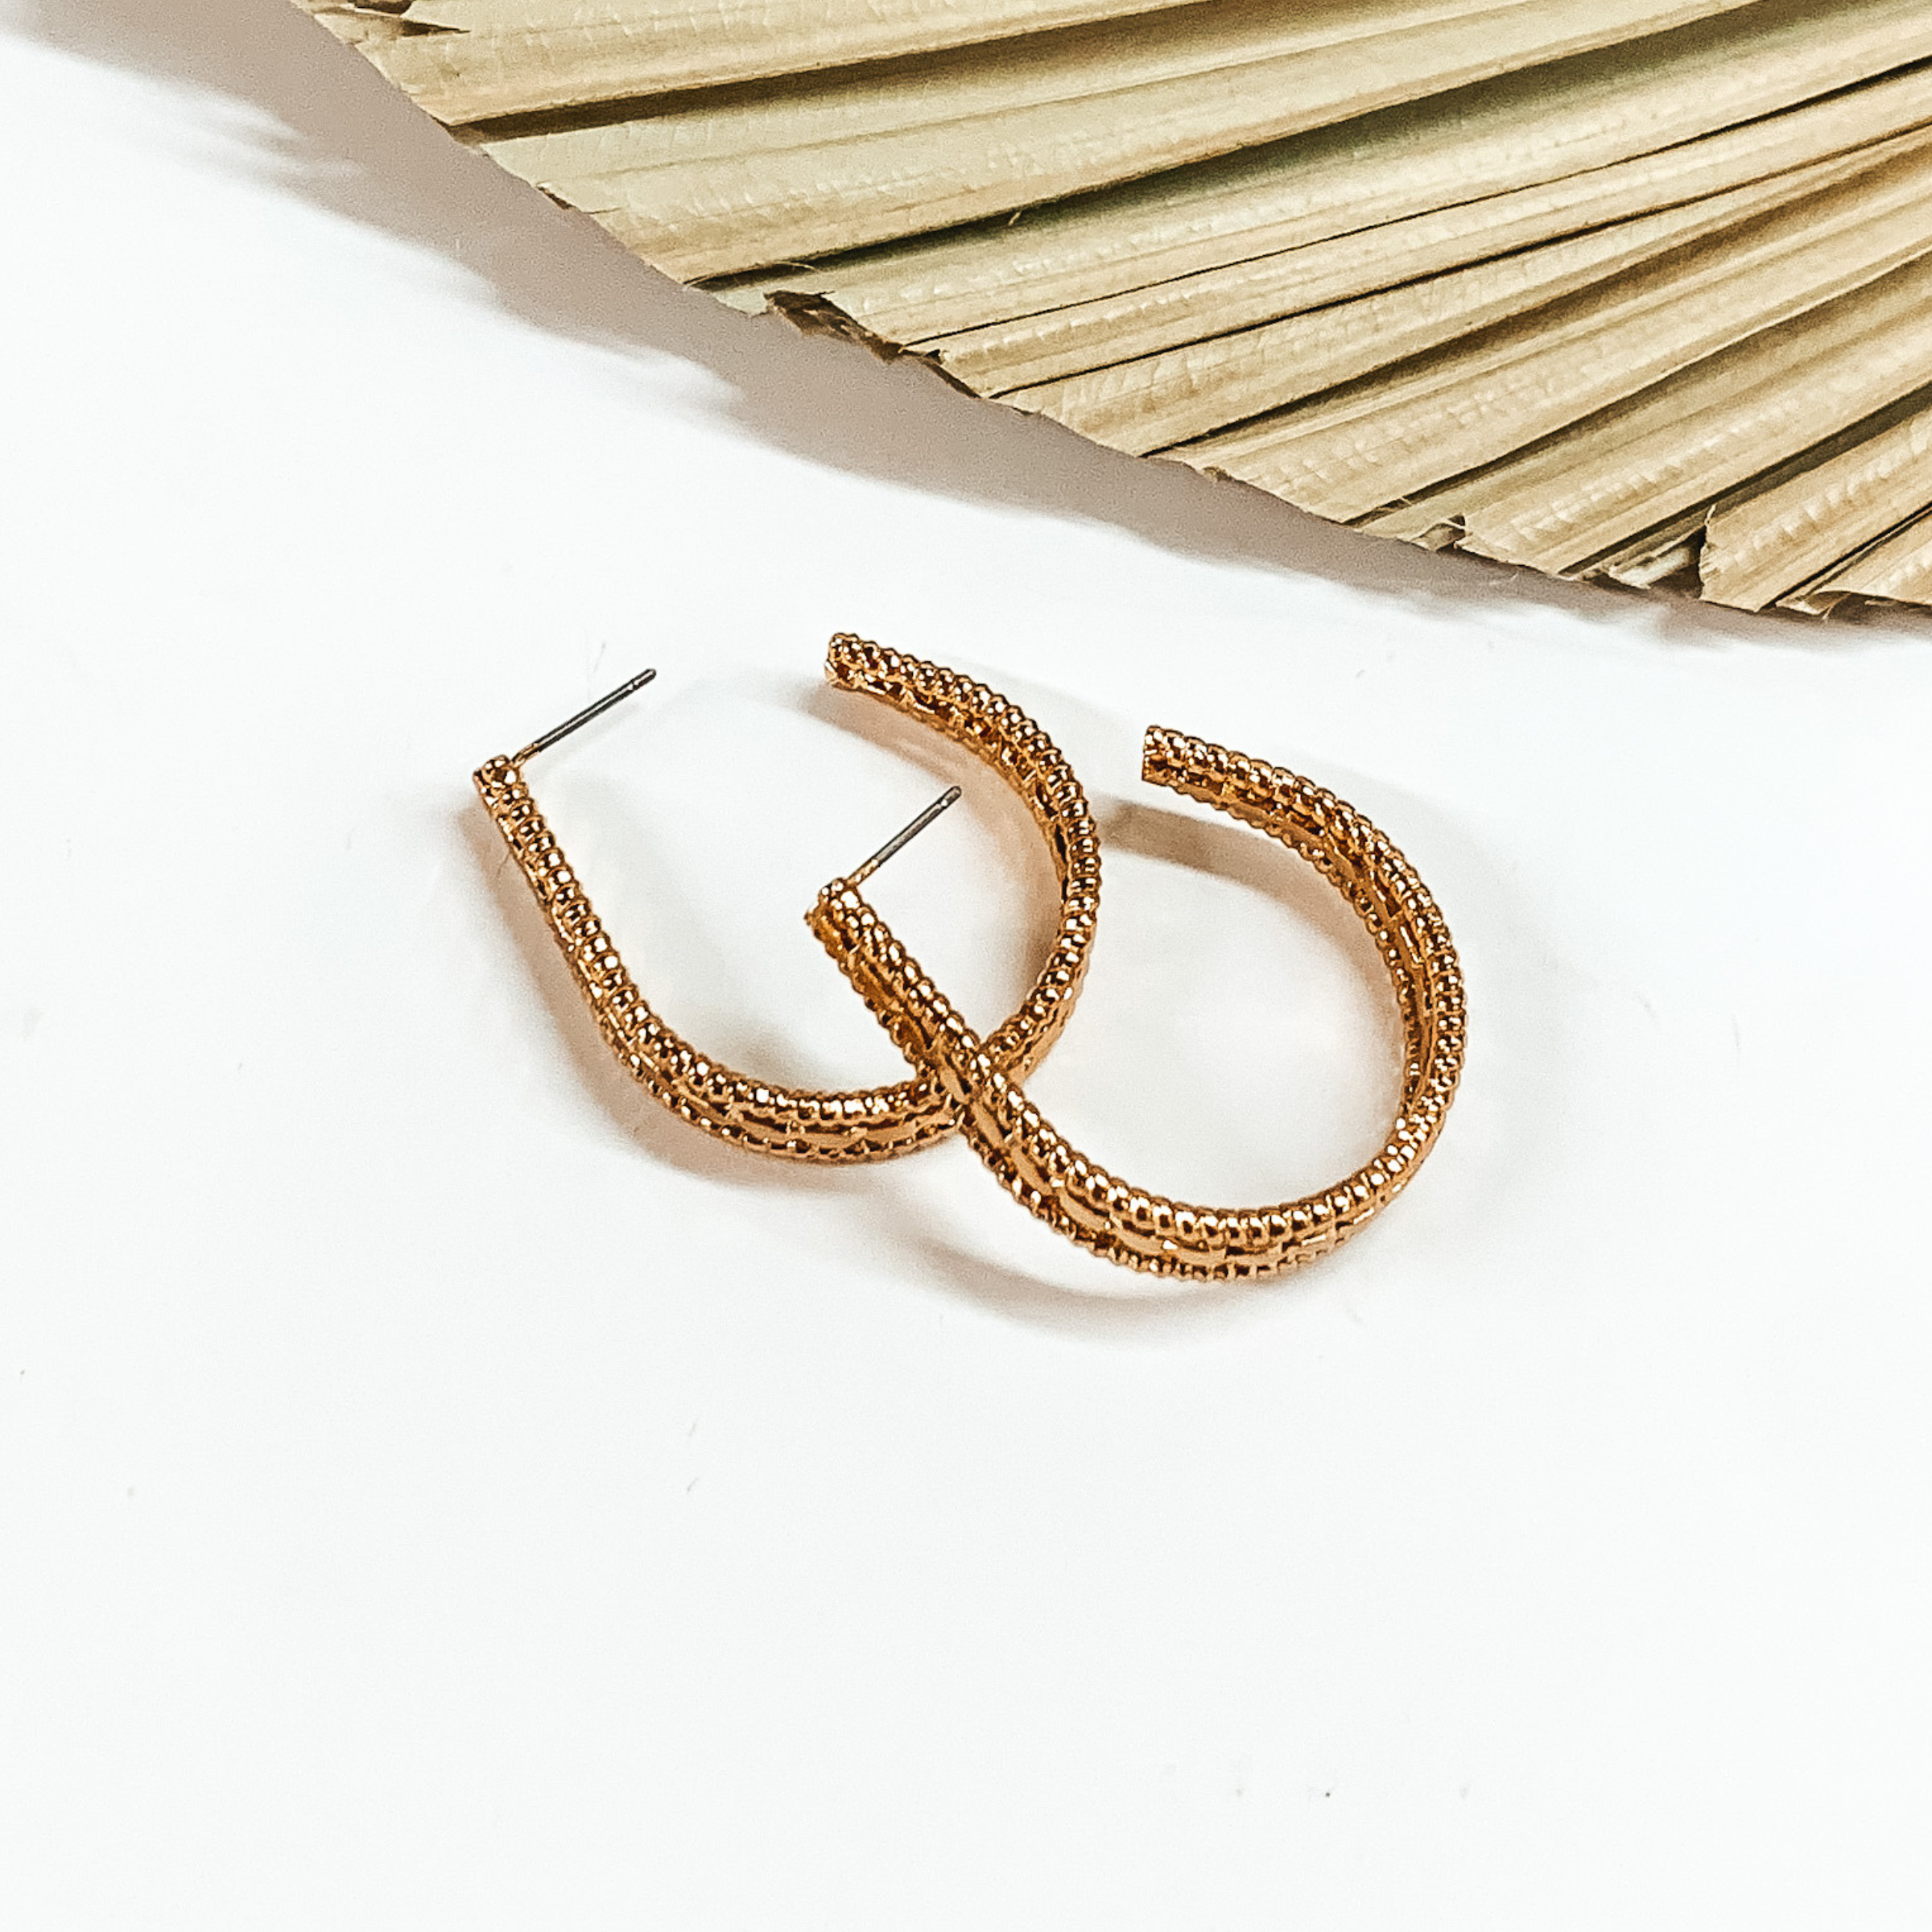 Darling Daze Rope Textured Teardrop Hoop Earrings in Gold Tone - Giddy Up Glamour Boutique